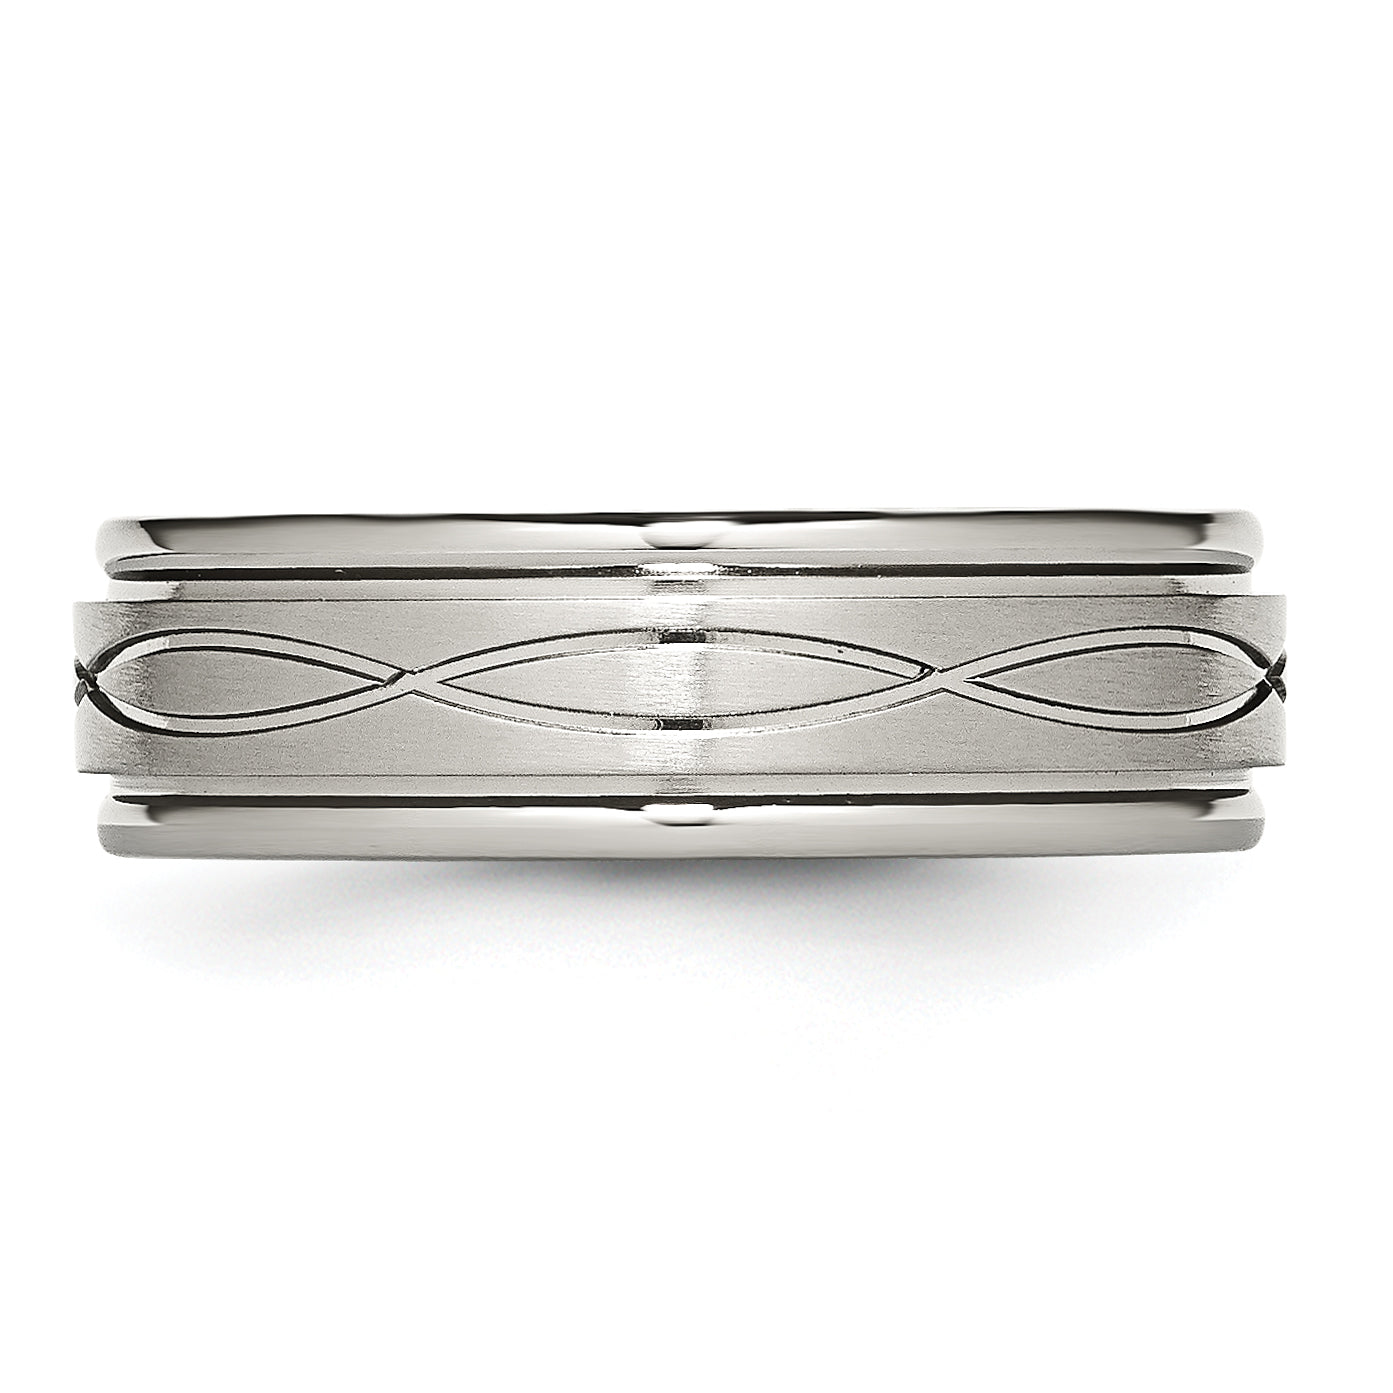 Stainless Steel Brushed and Polished Criss-cross Design 7mm Ridged Edge Band